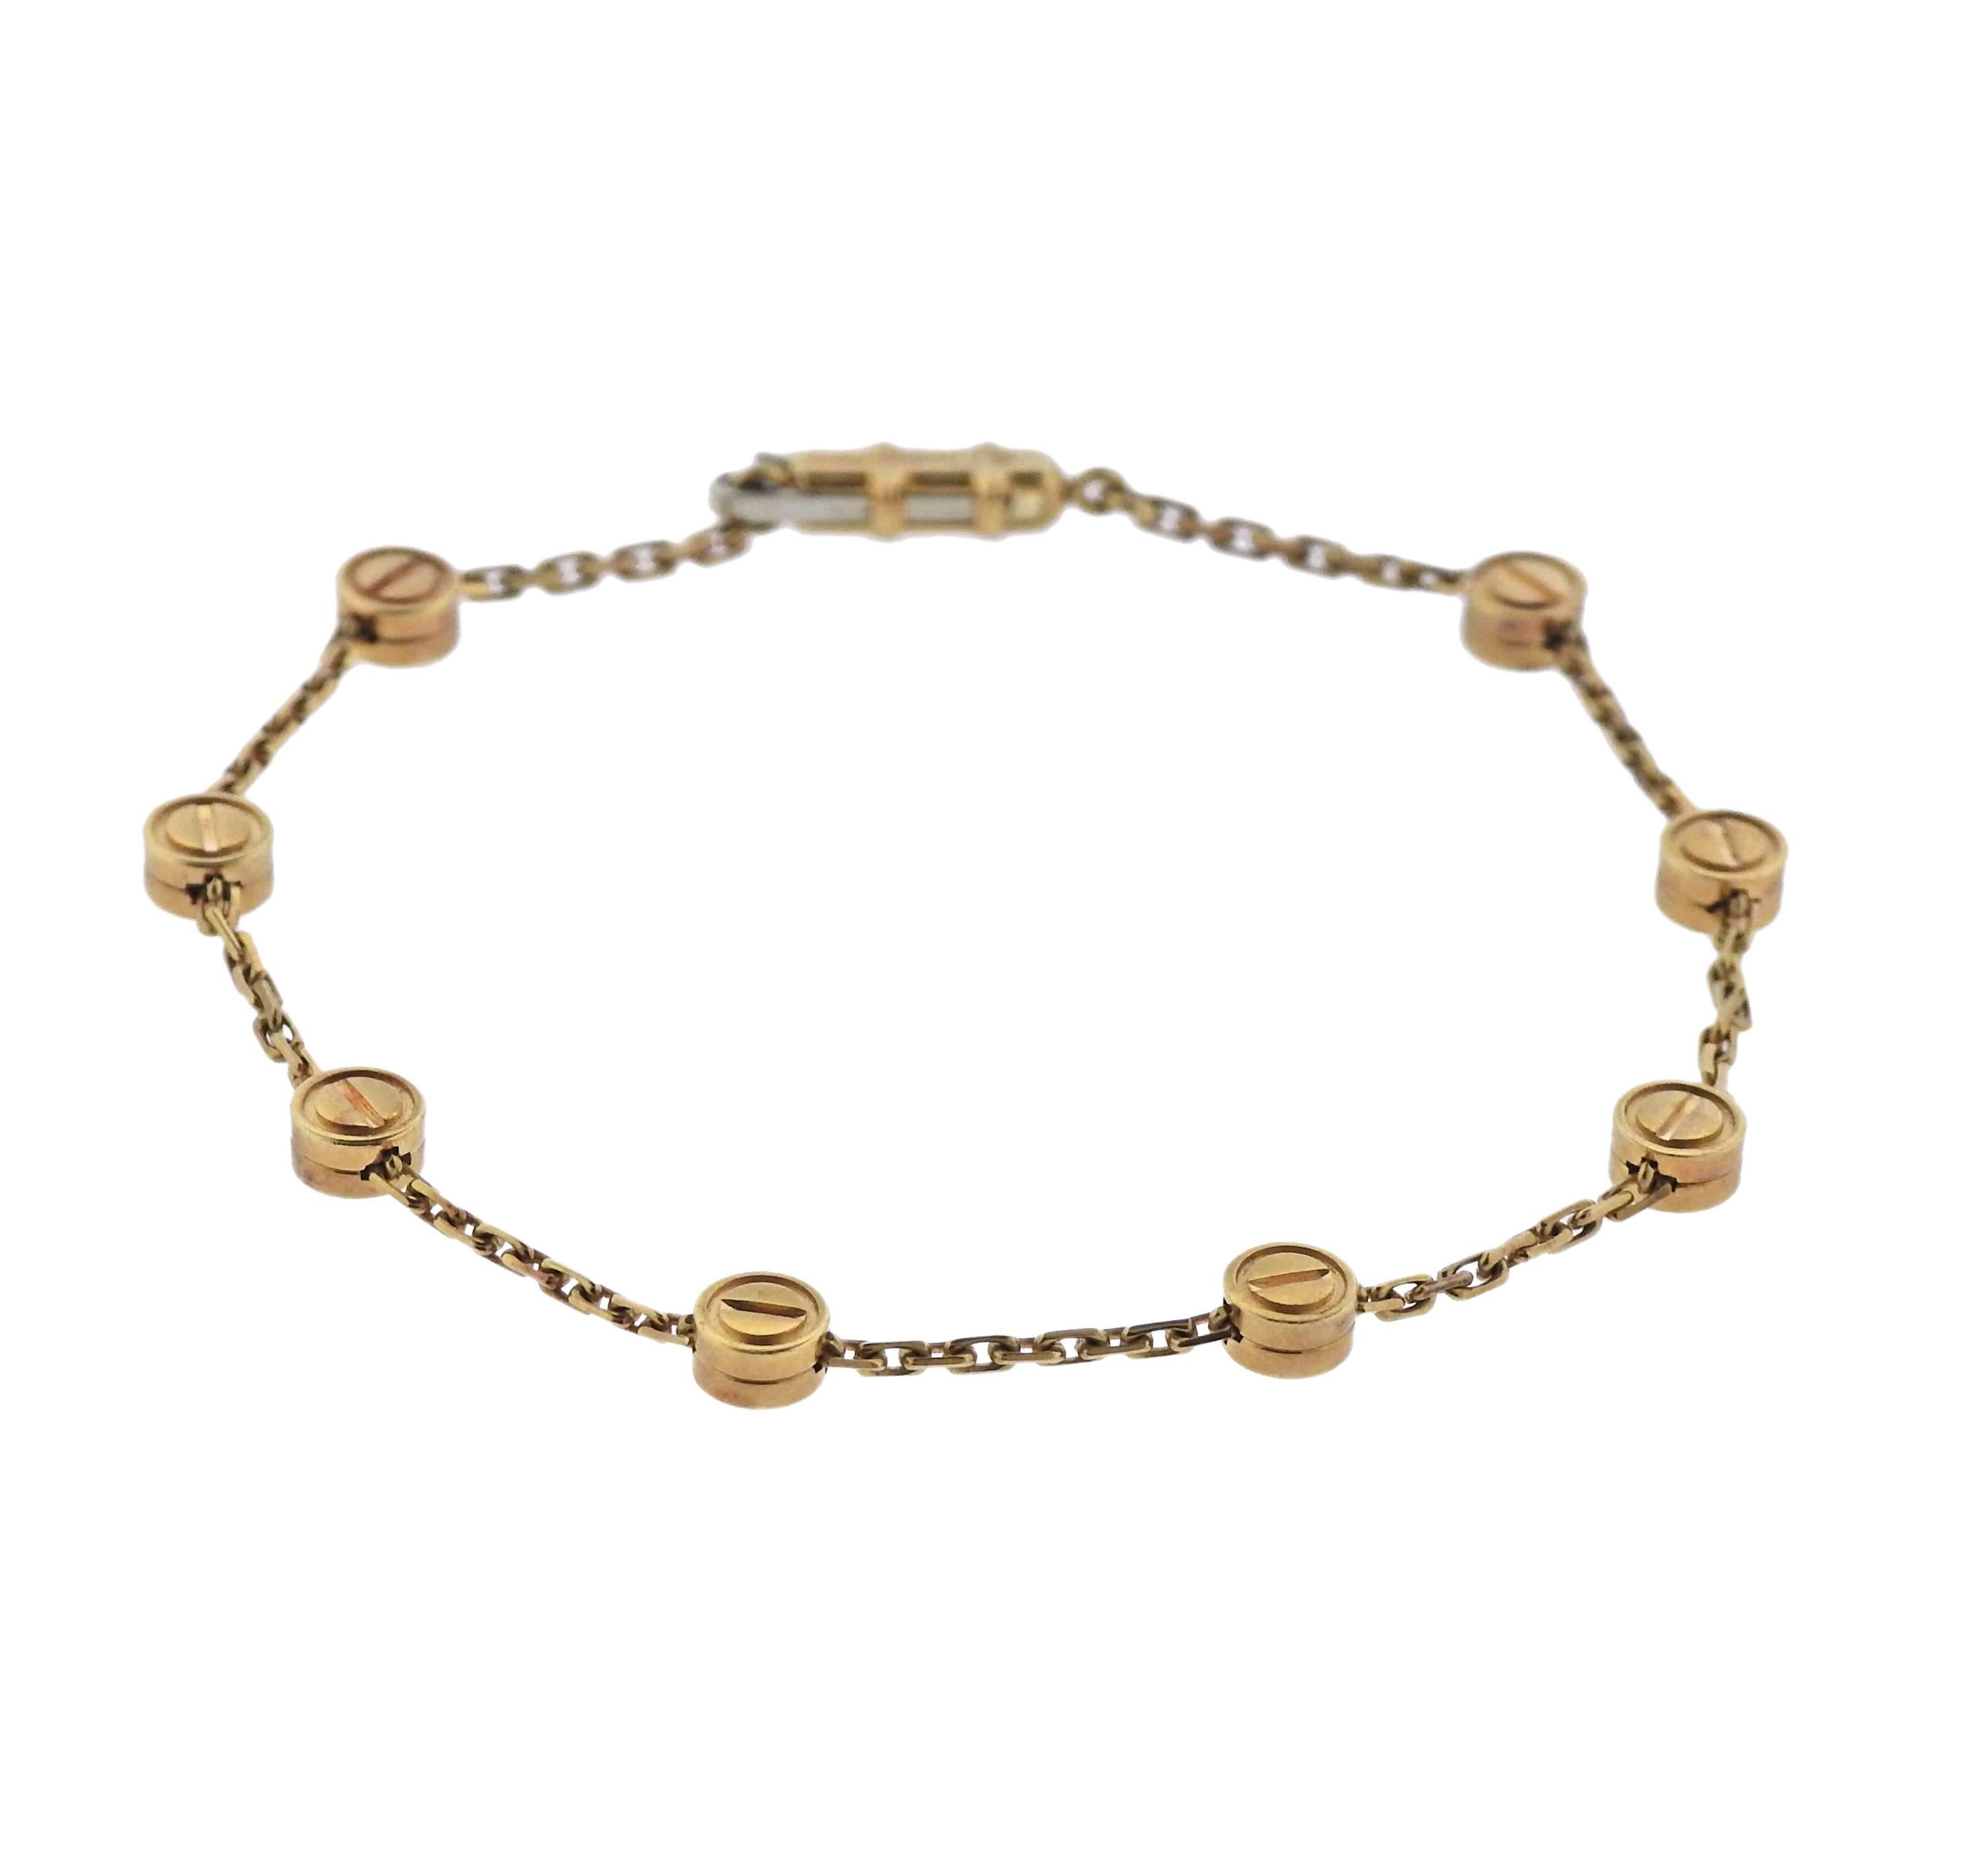 Rare vintage 18k yellow gold Love station bracelet, crafted by Cartier.  Bracelet is 7